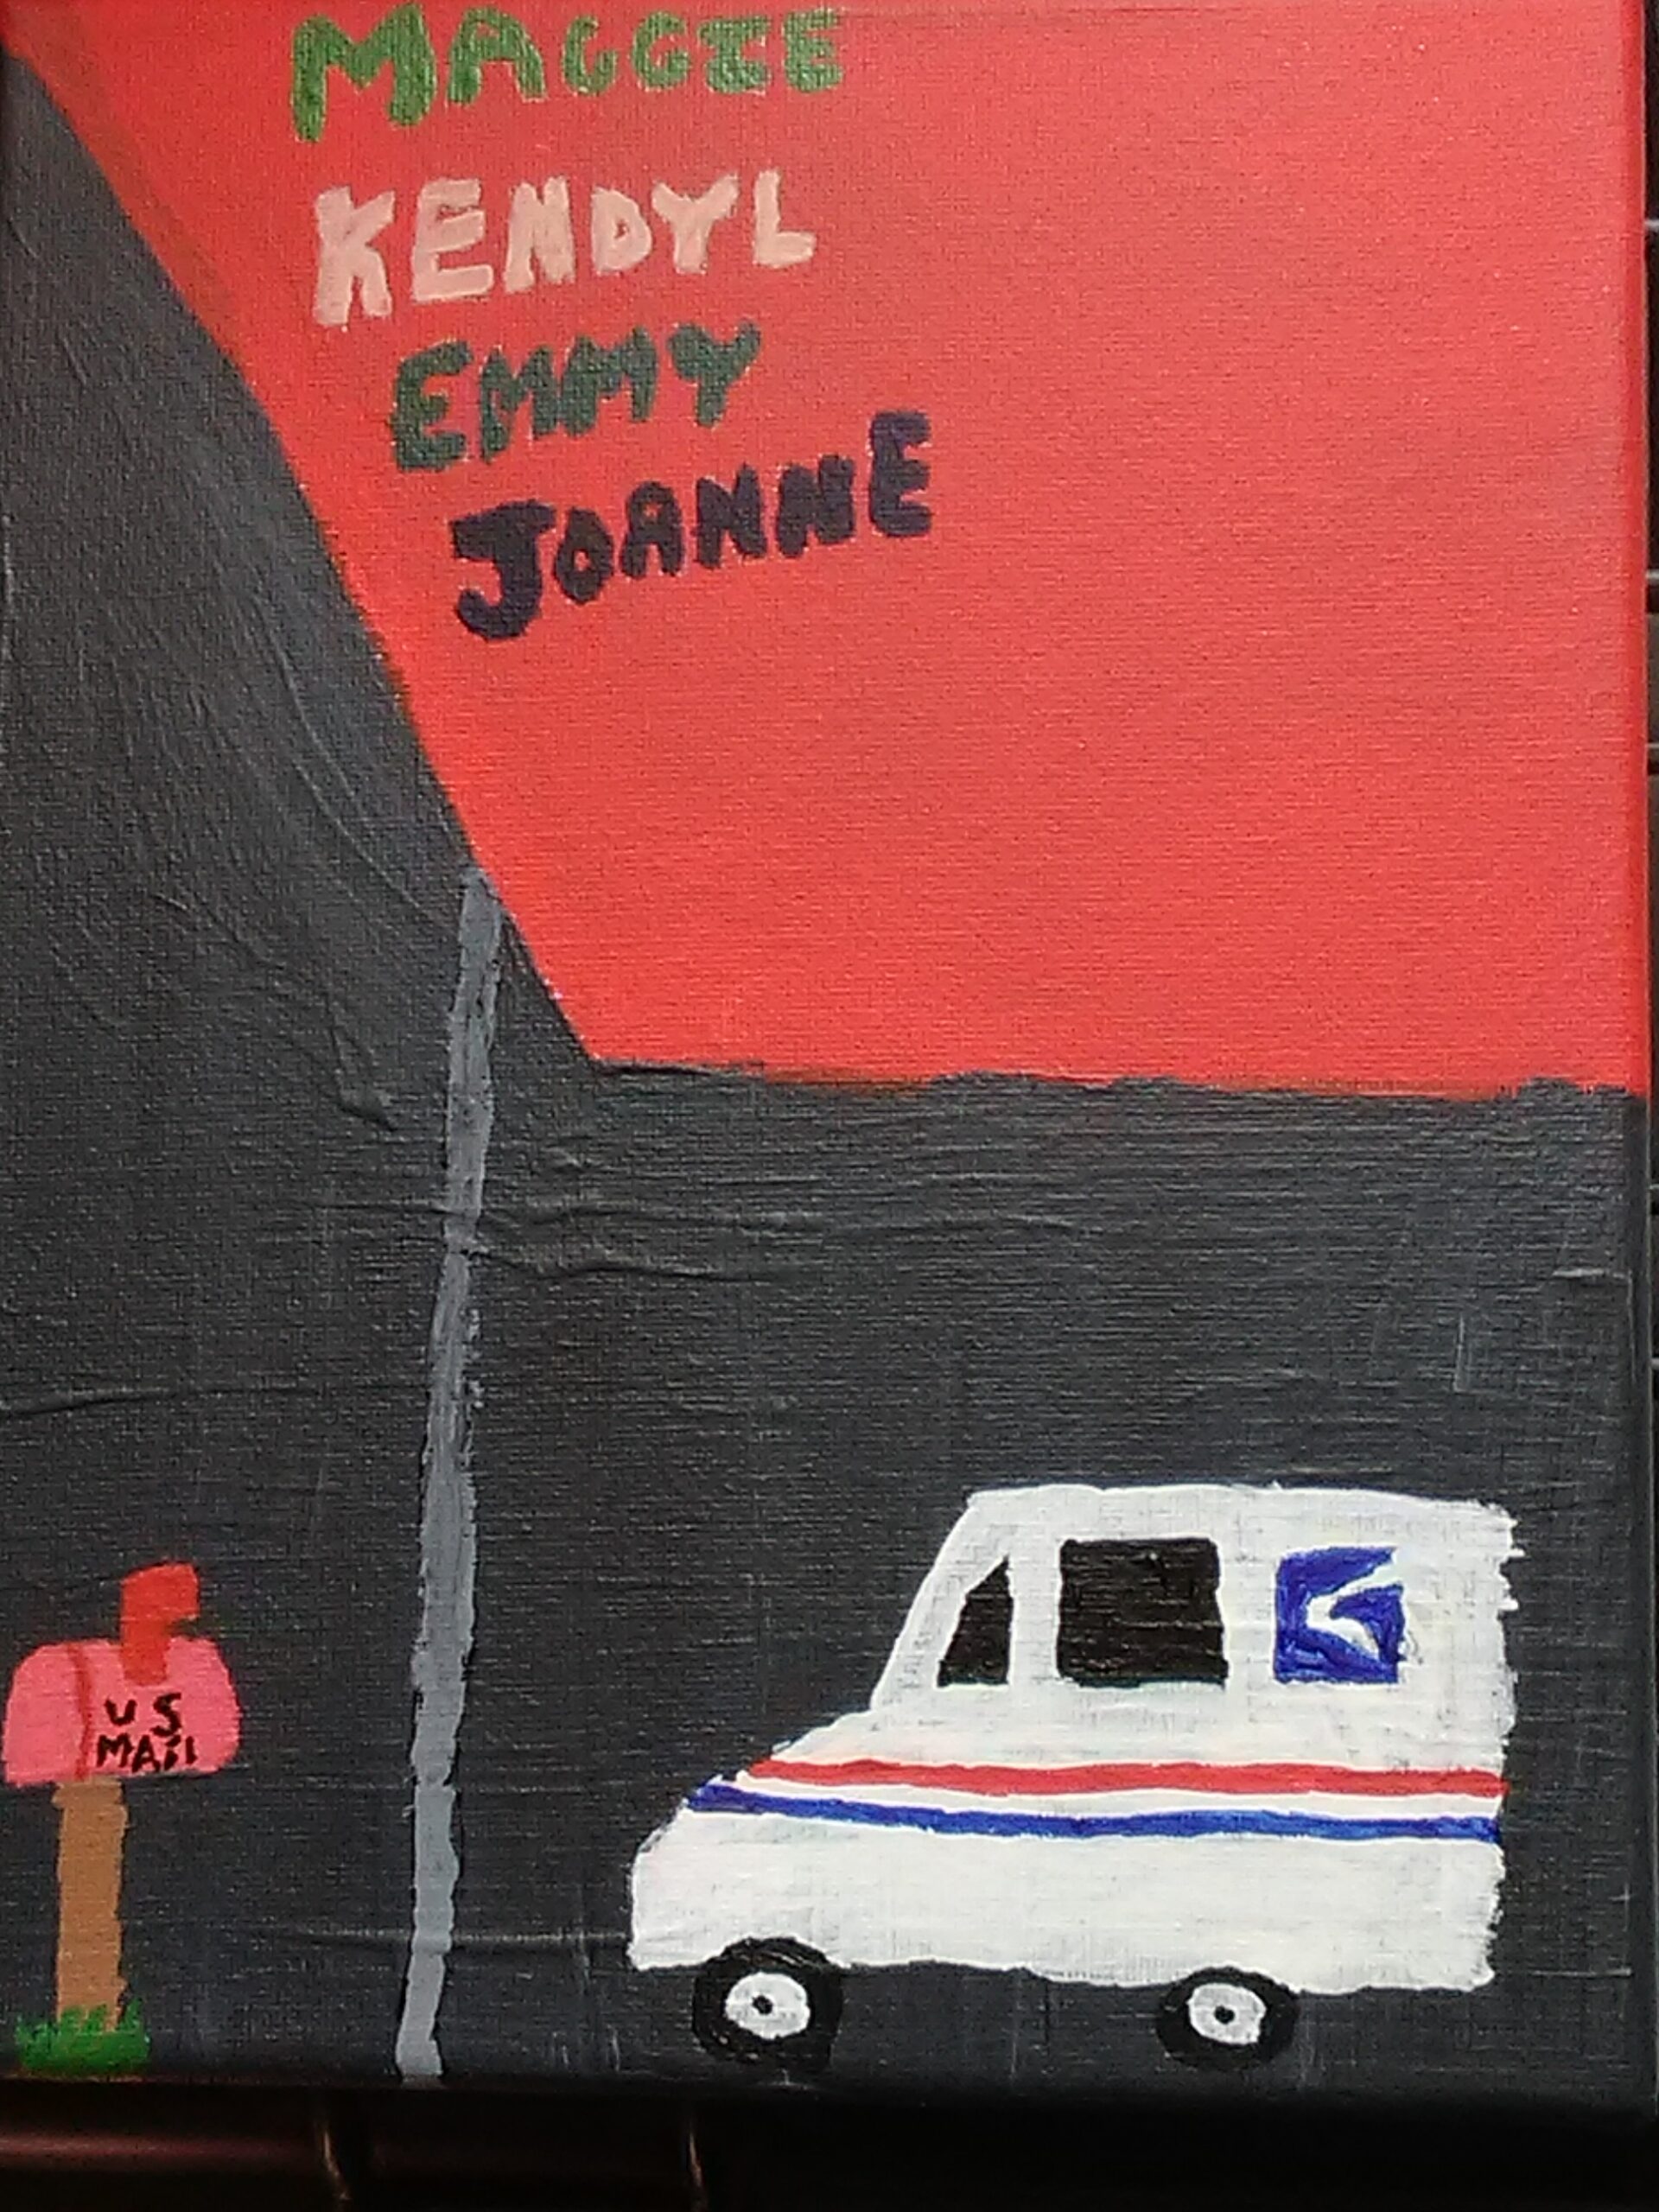 In the bottom right corner is a painted USPS Mail Car driving up to a mailbox. At the top shows a list of names that the artist seems to be missing.